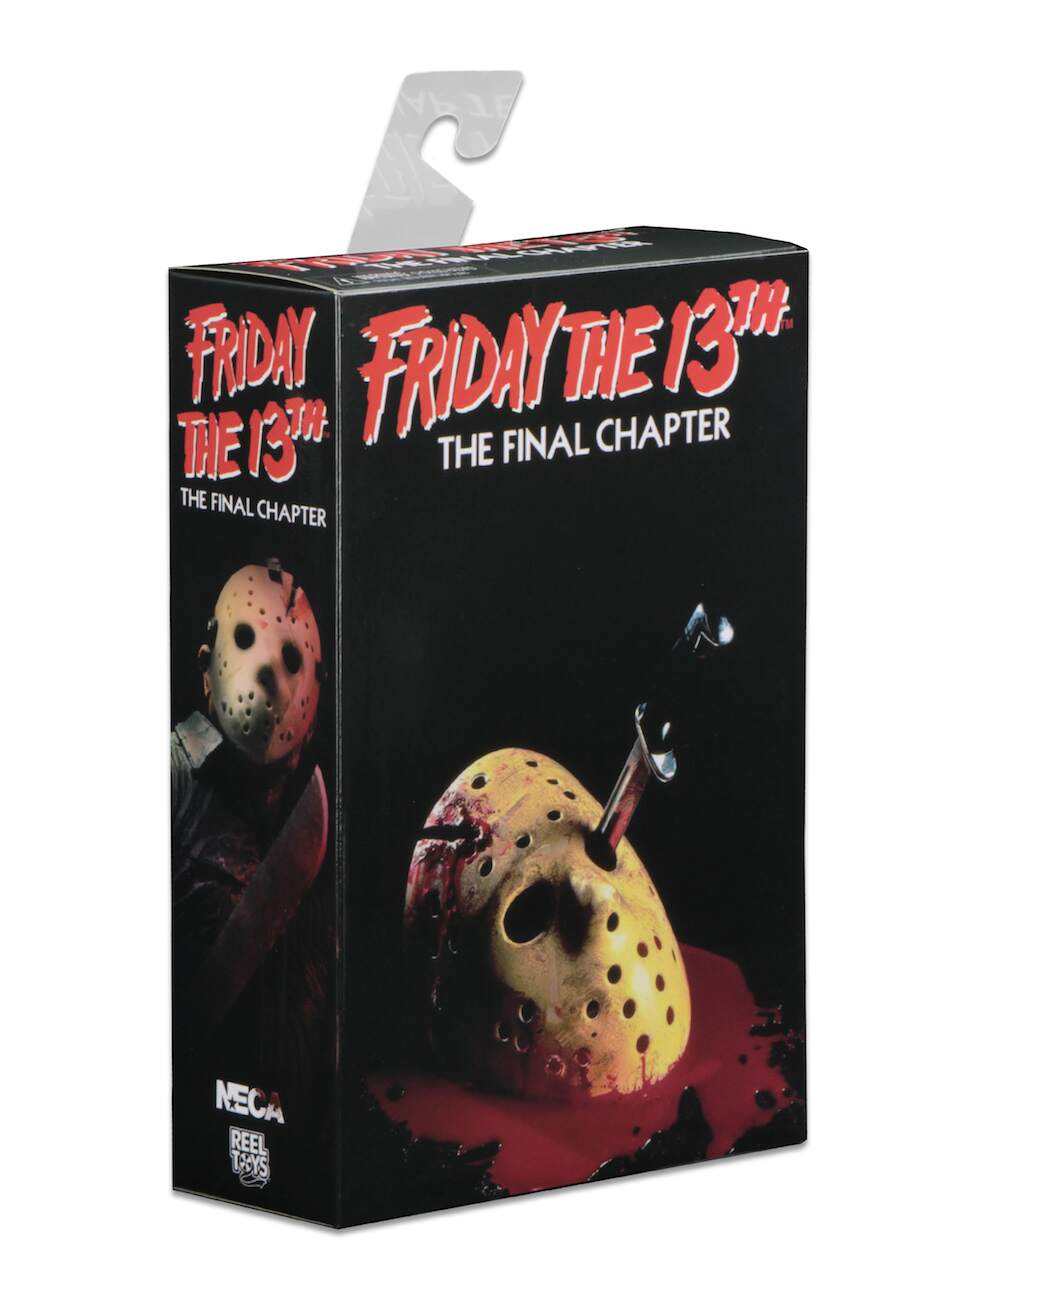 NECA Ultimate Figure box of Jason Voorhees from Friday the 13th Part 4